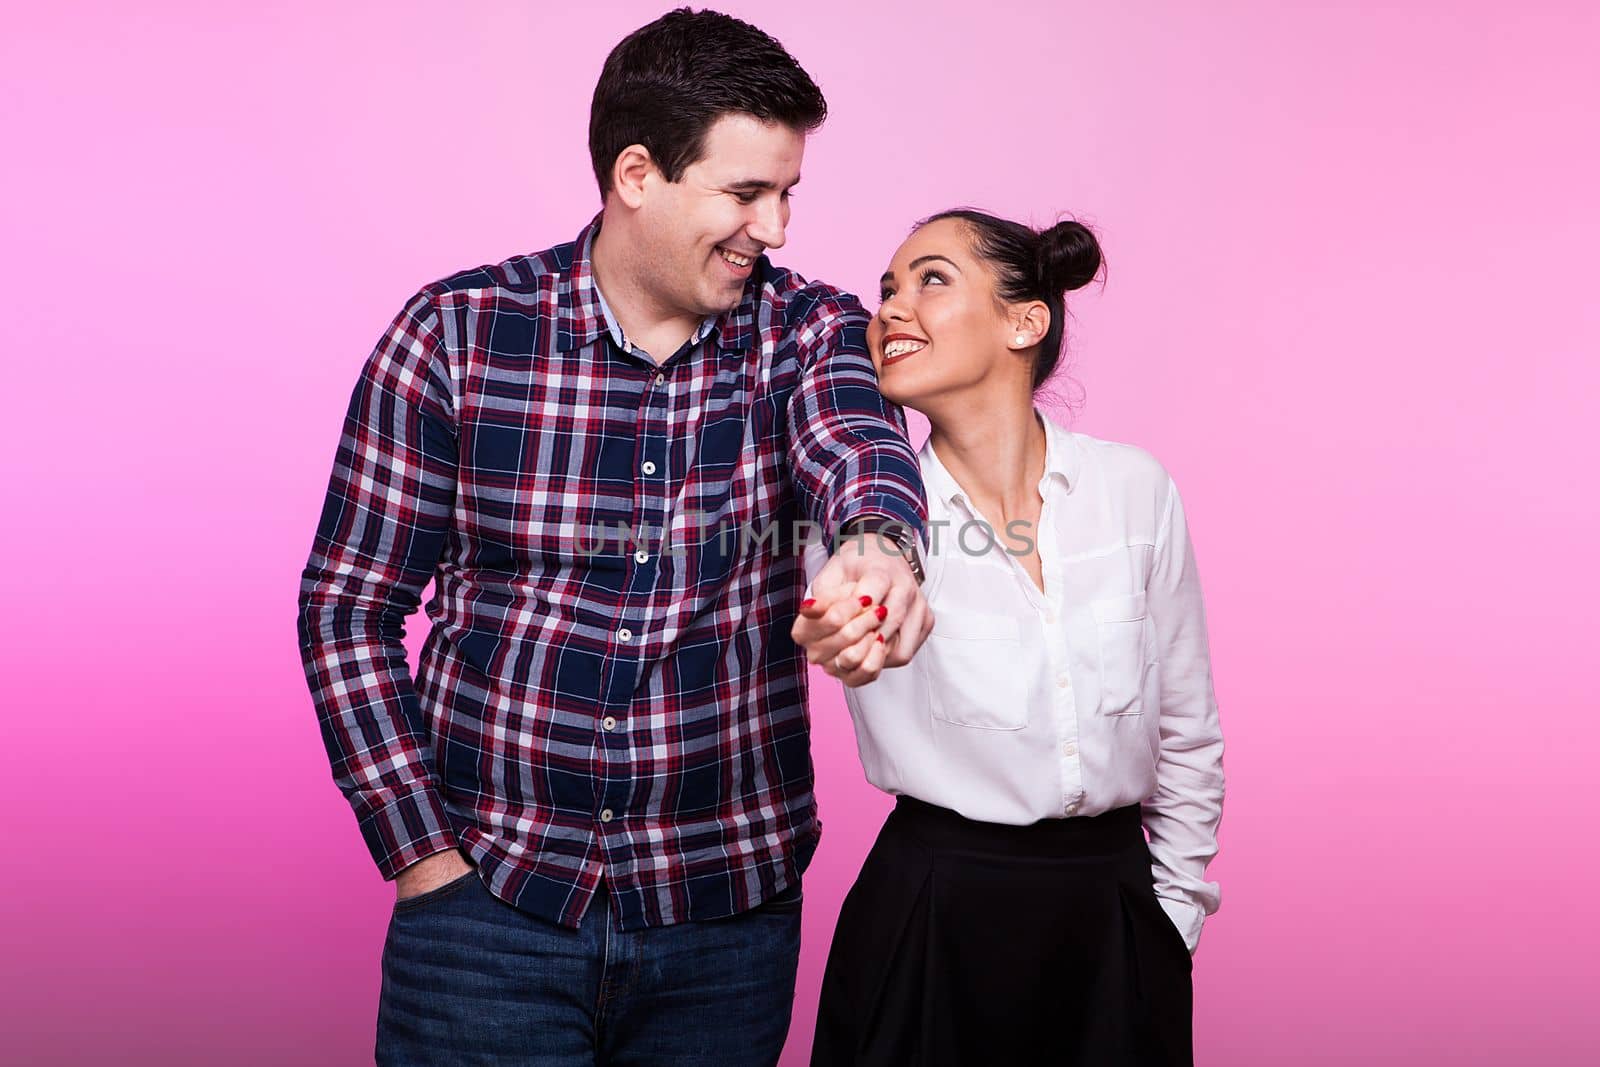 Happy inlove couple holding hands on pink background in studio